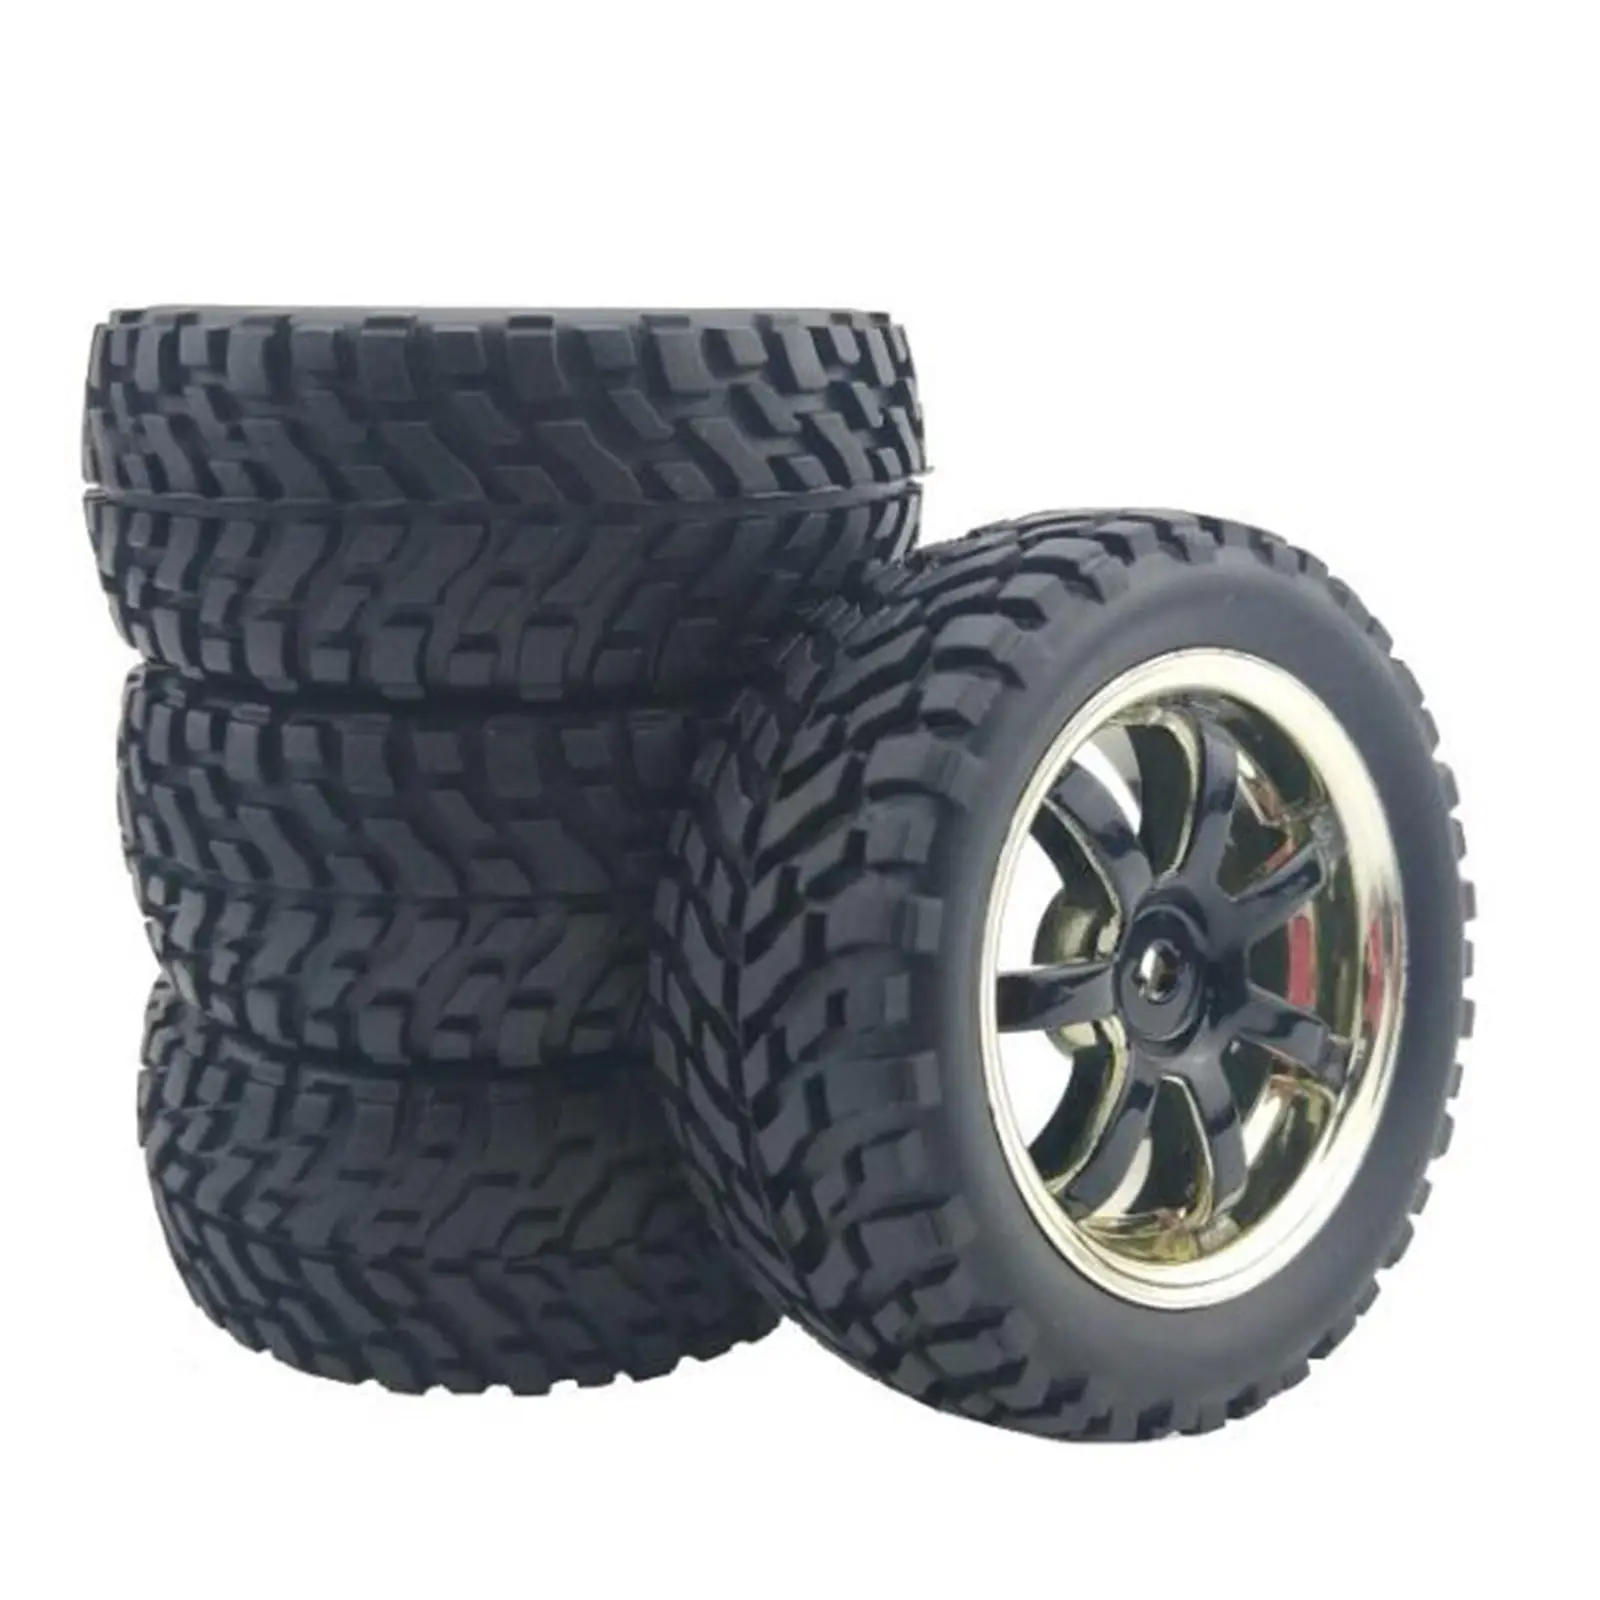 RC Rubber Tire for Wltoys 144001 124018 124019 Scale Off Road Hobby Model Toy Replacement